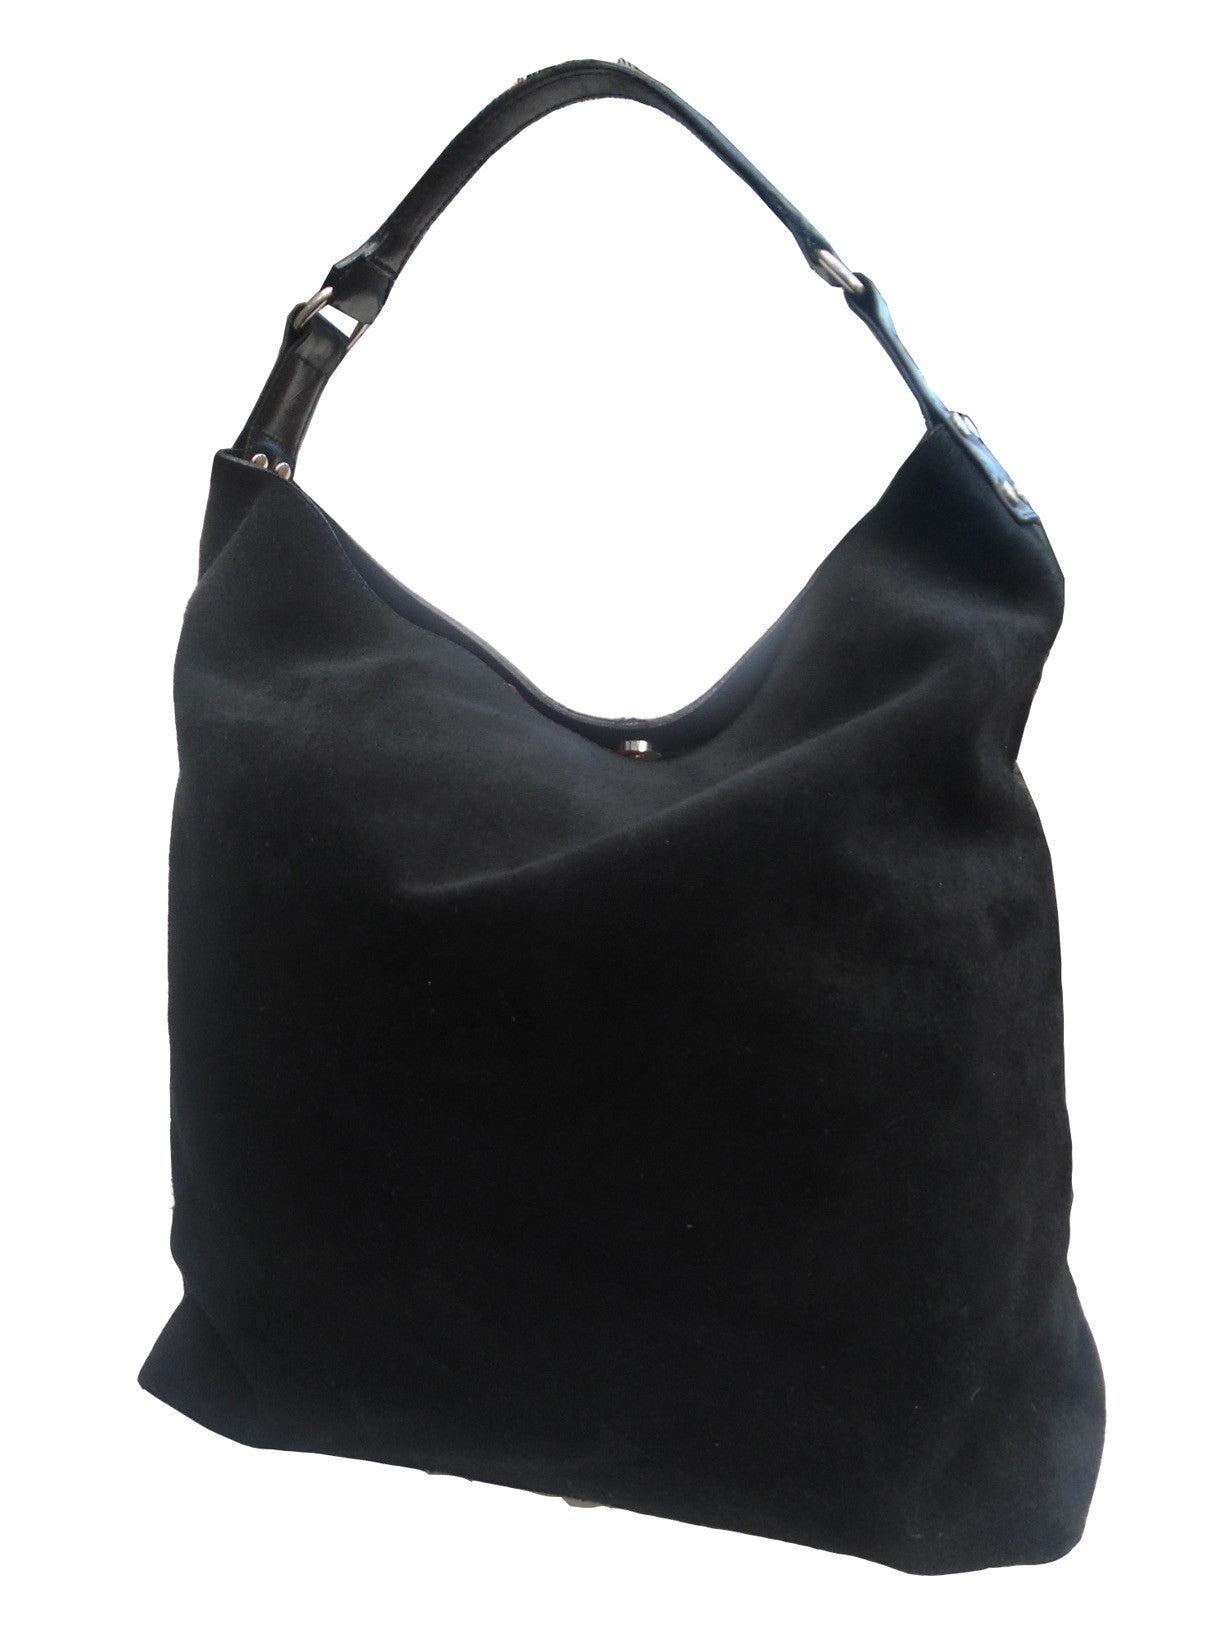 Pancho Hobo Bag In Suede Black or Chocolate